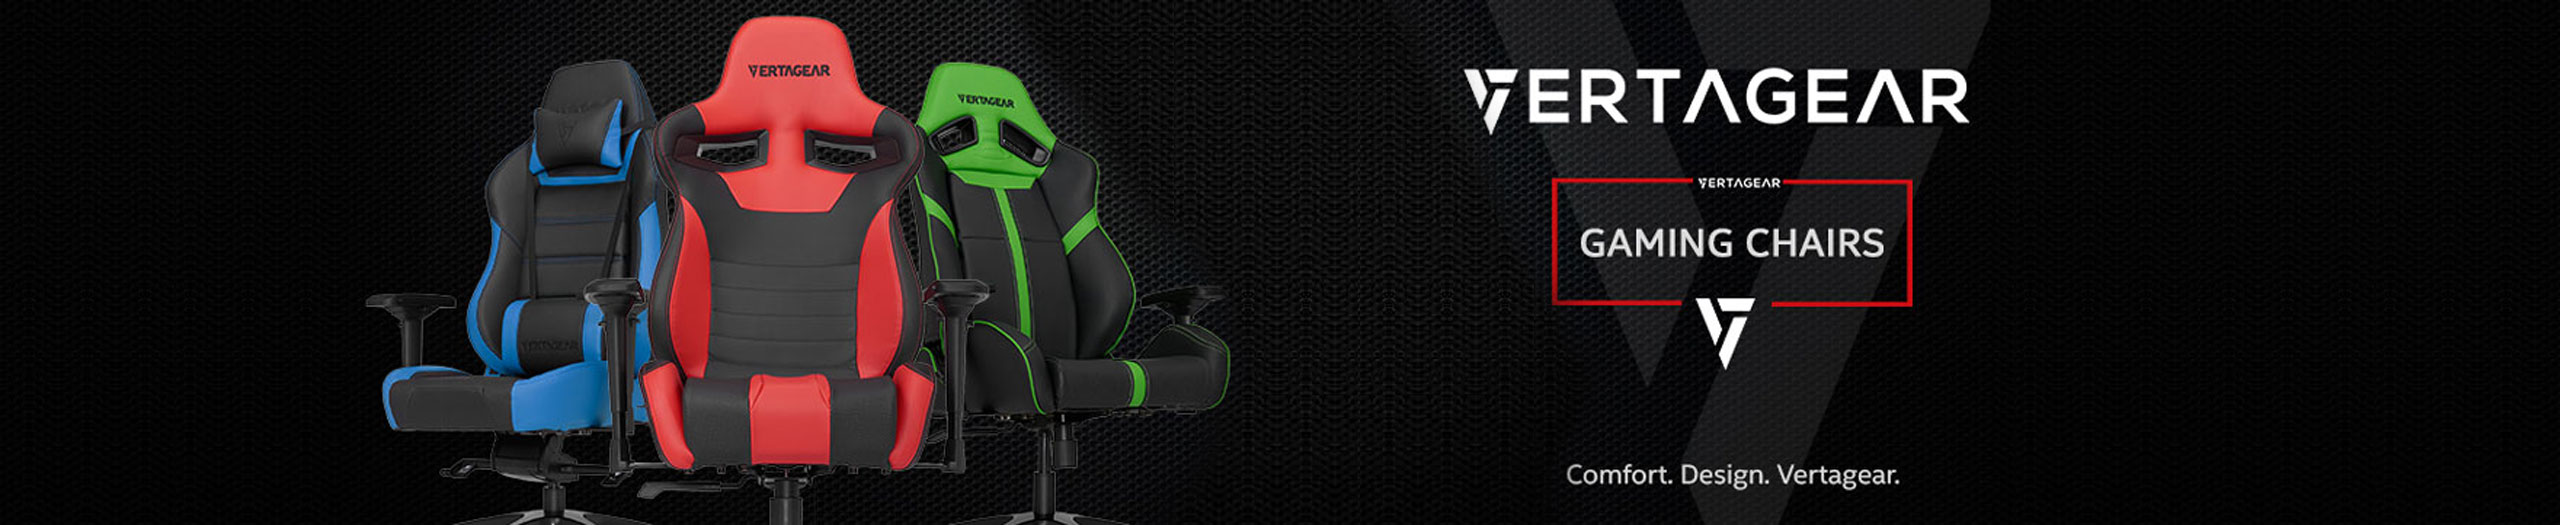 Vertagear Gaming Chairs